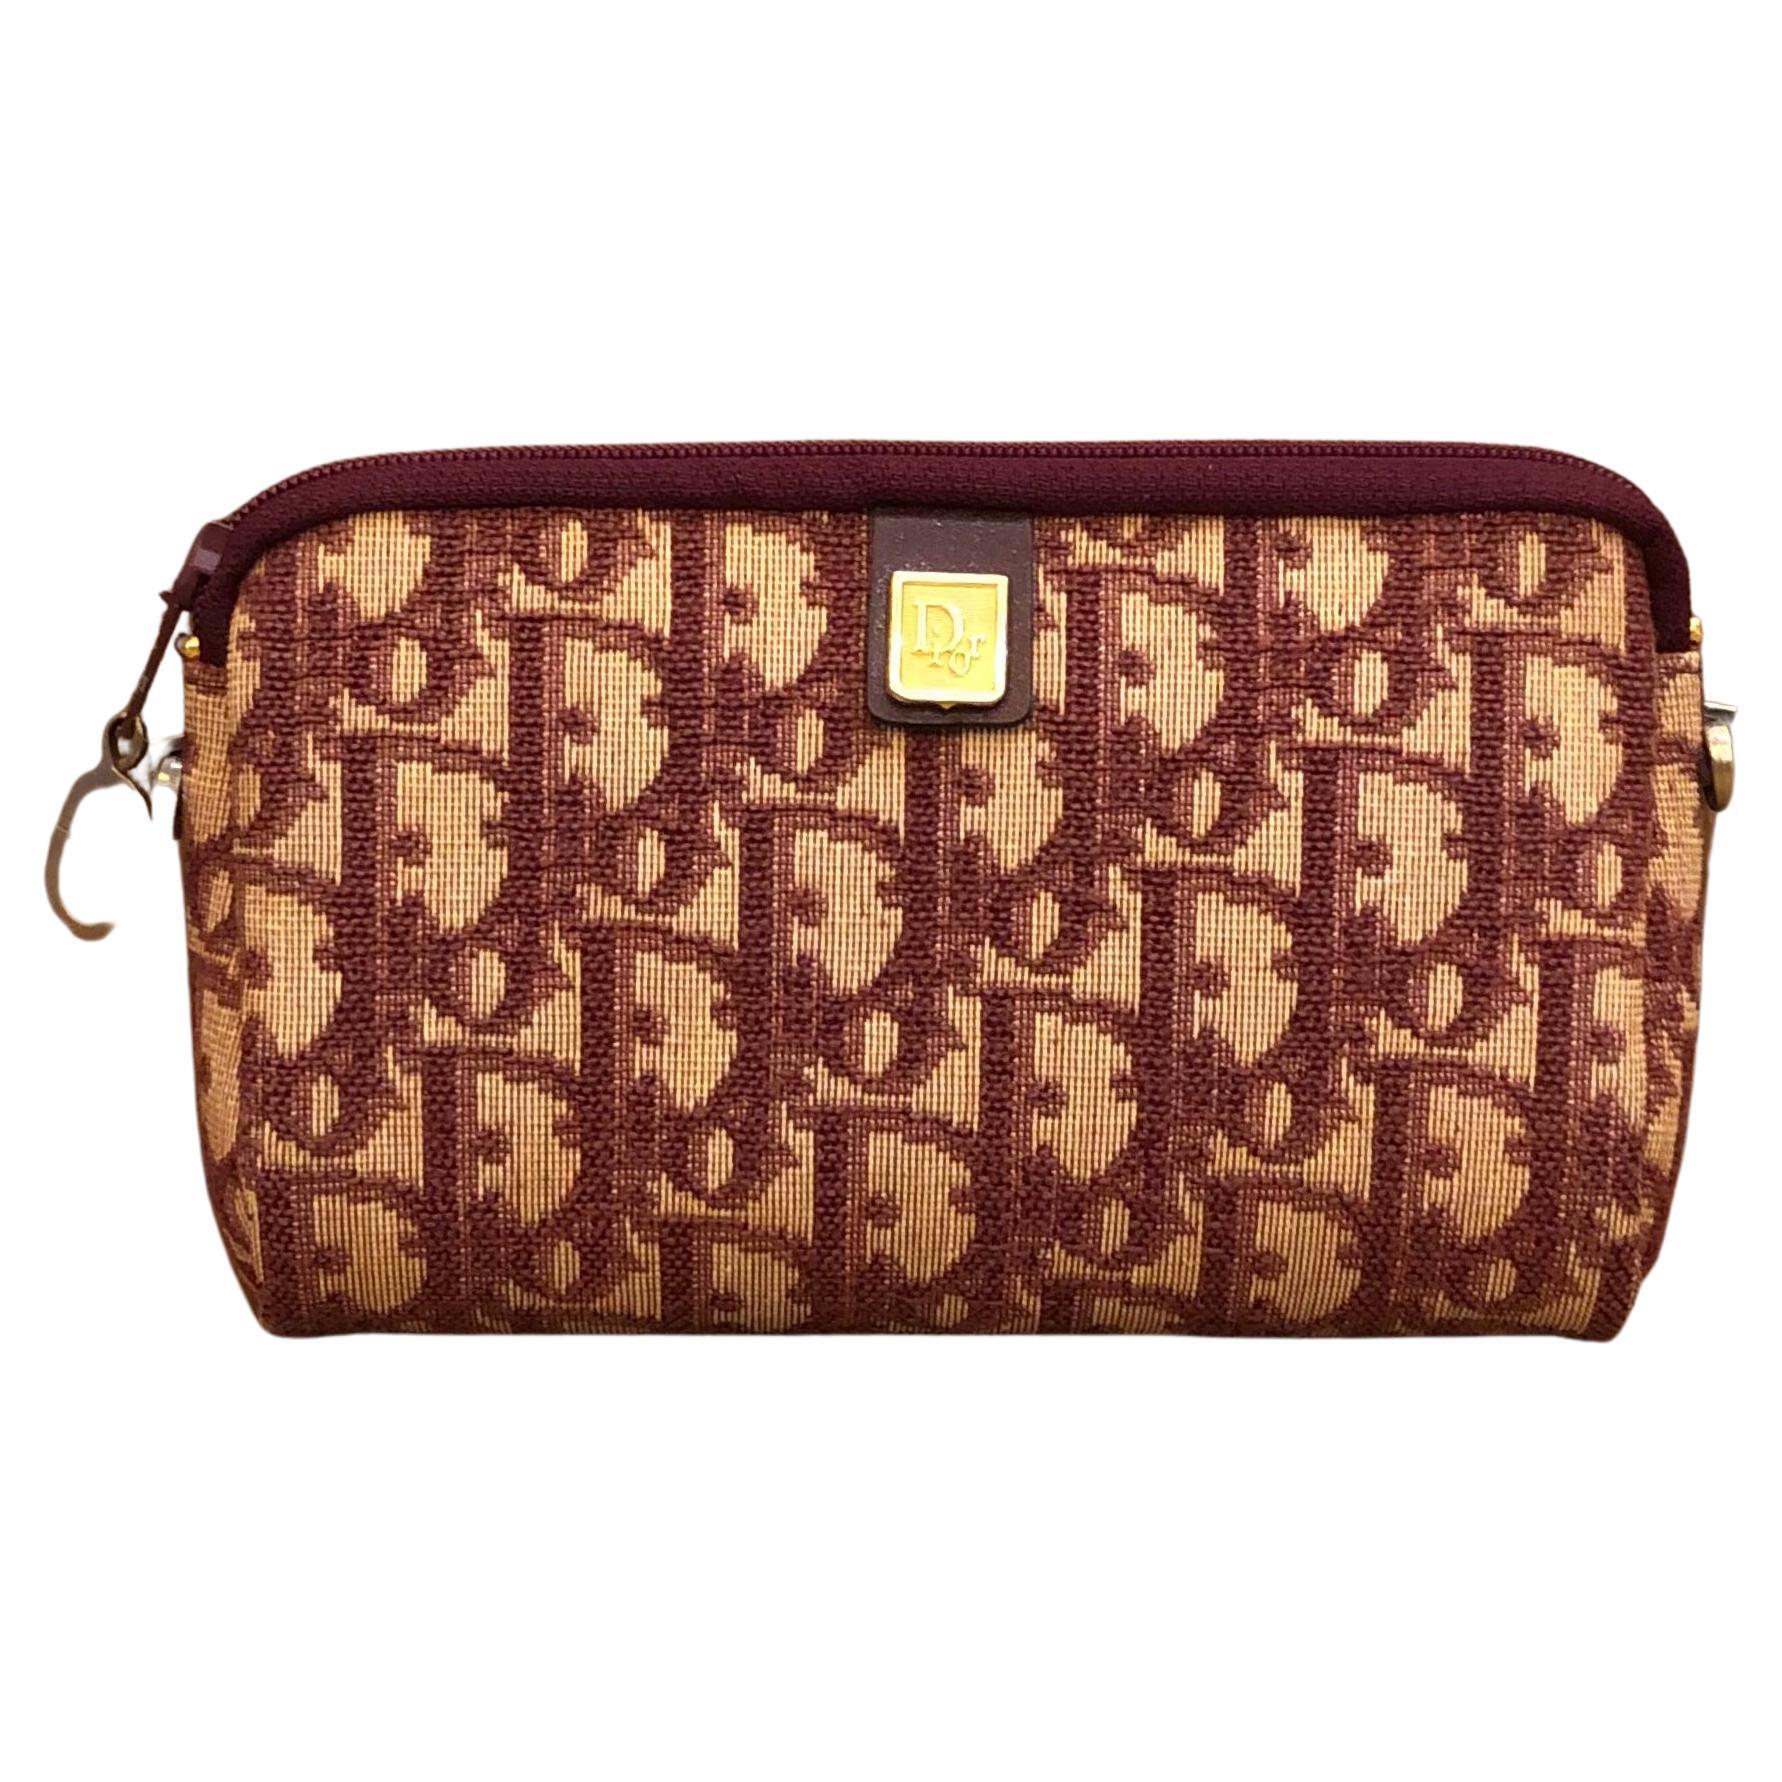 Vintage CHRISTIAN DIOR Burgundy Jacquard Trotter Mini Pouch (Altered)